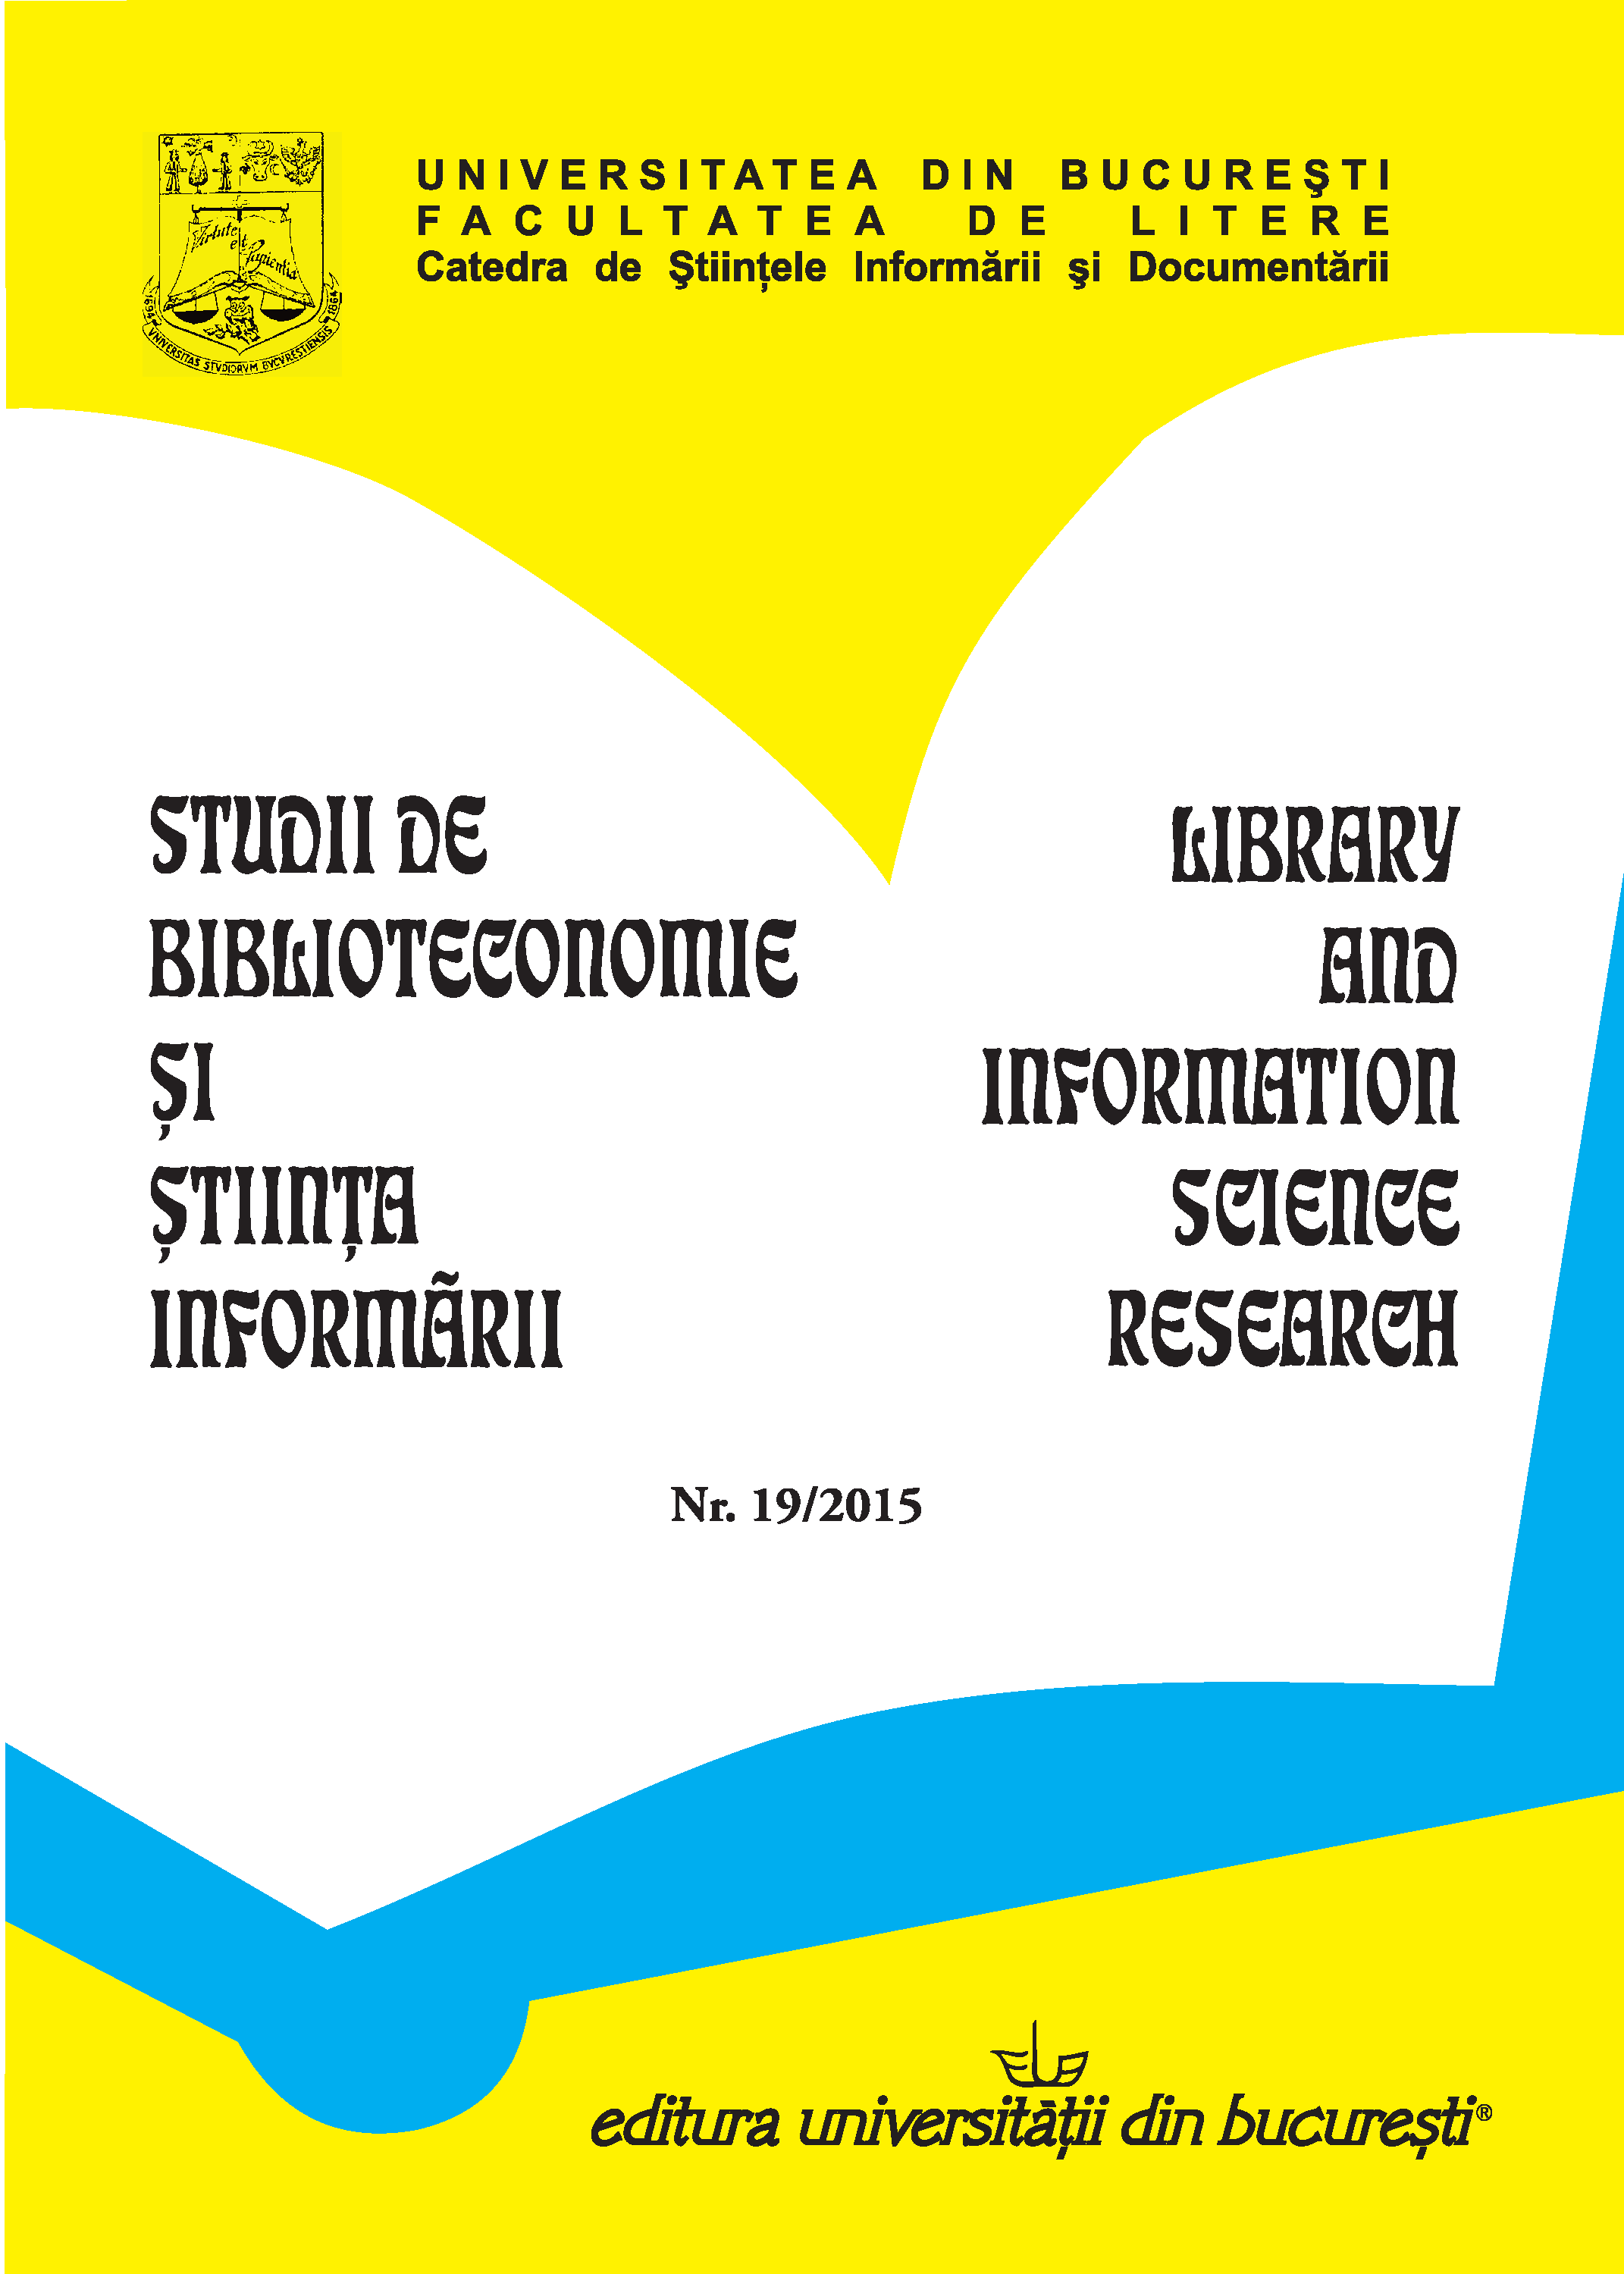 Modern Romanian Library Science Education Cover Image